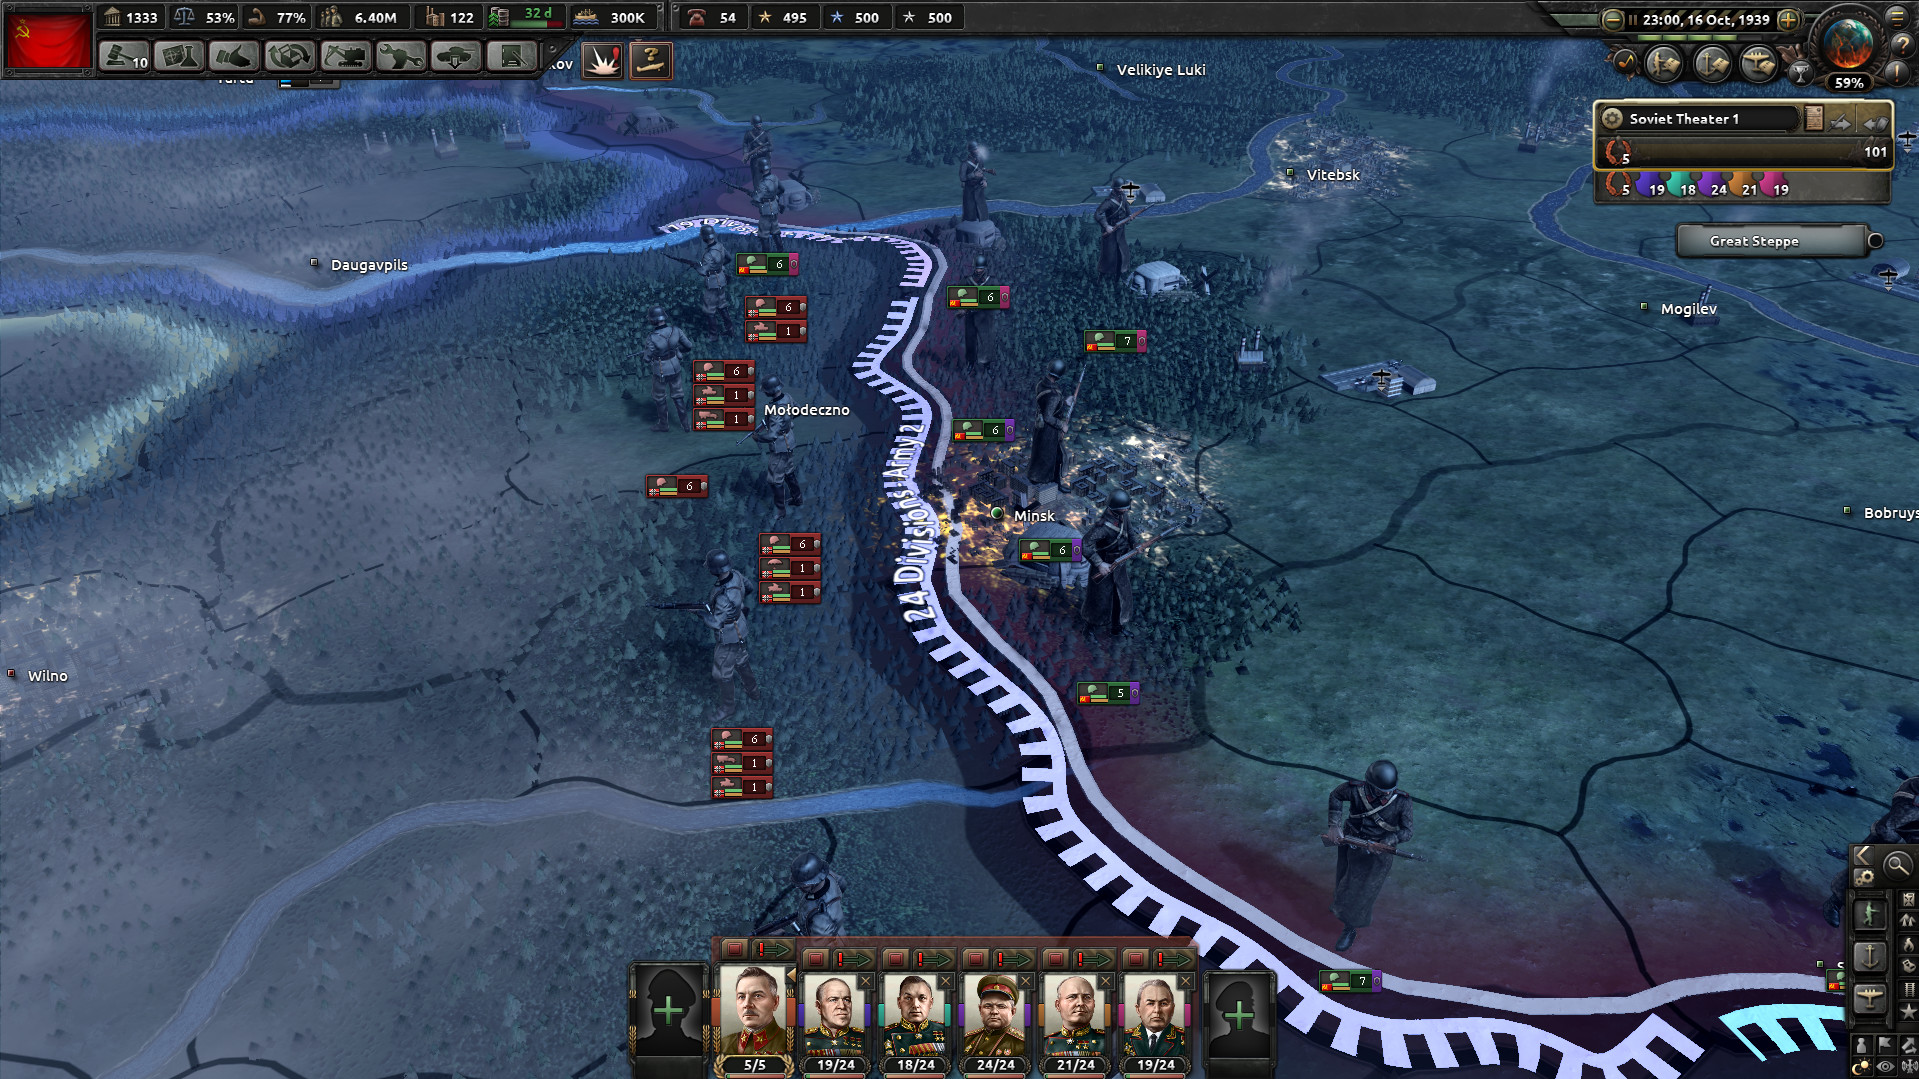 Save 75% on Hearts of Iron IV on Steam